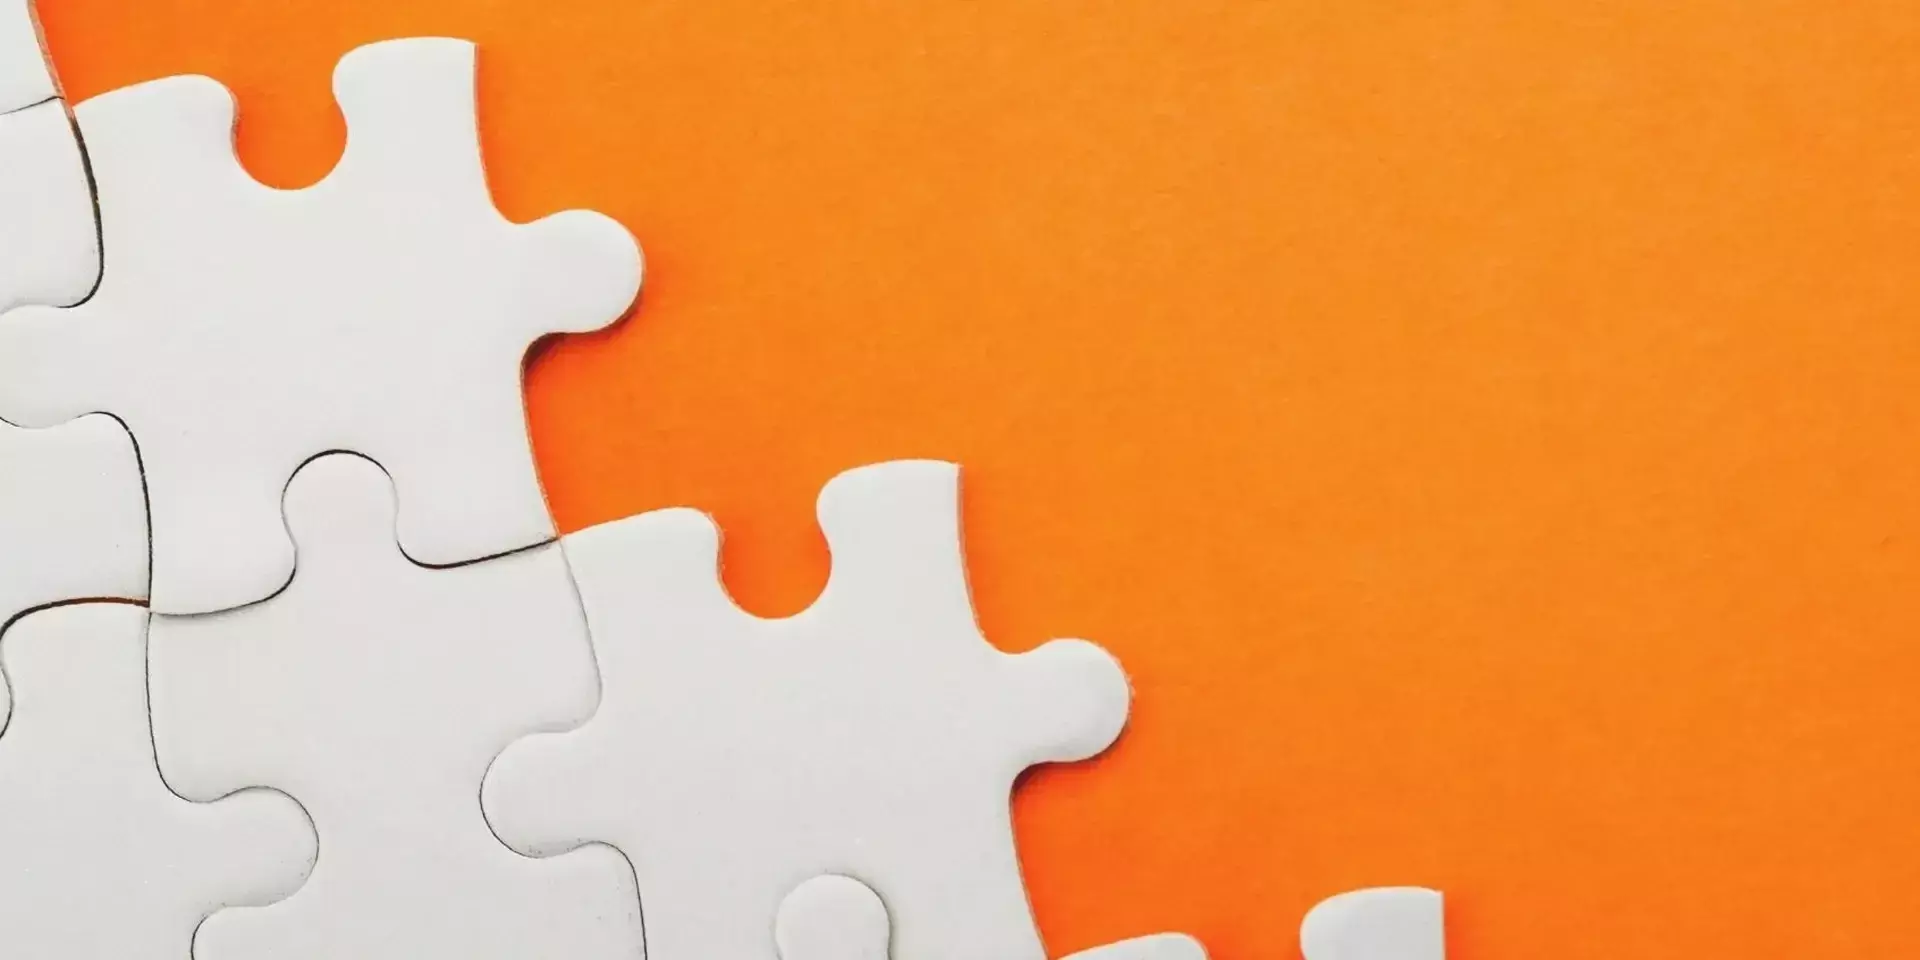 a white jigsaw being completed against an orange background